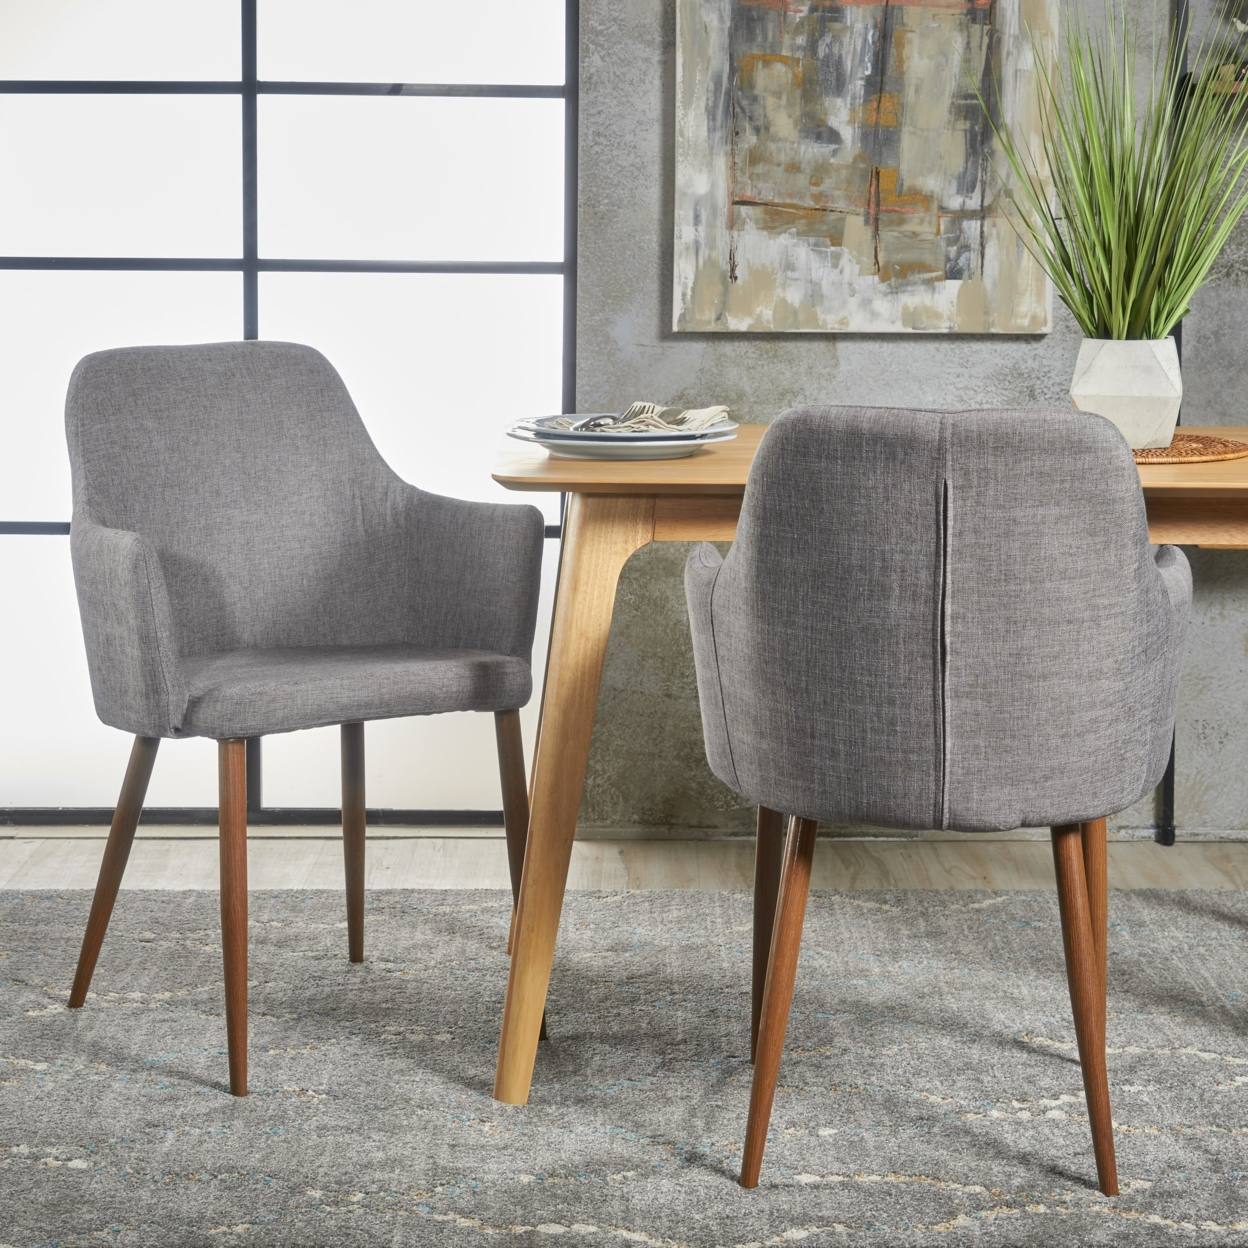 Serra Mid Century Fabric Dining Chair With Wood Finished Metal Legs (Set Of 2) - Light Gray/Dark Brown